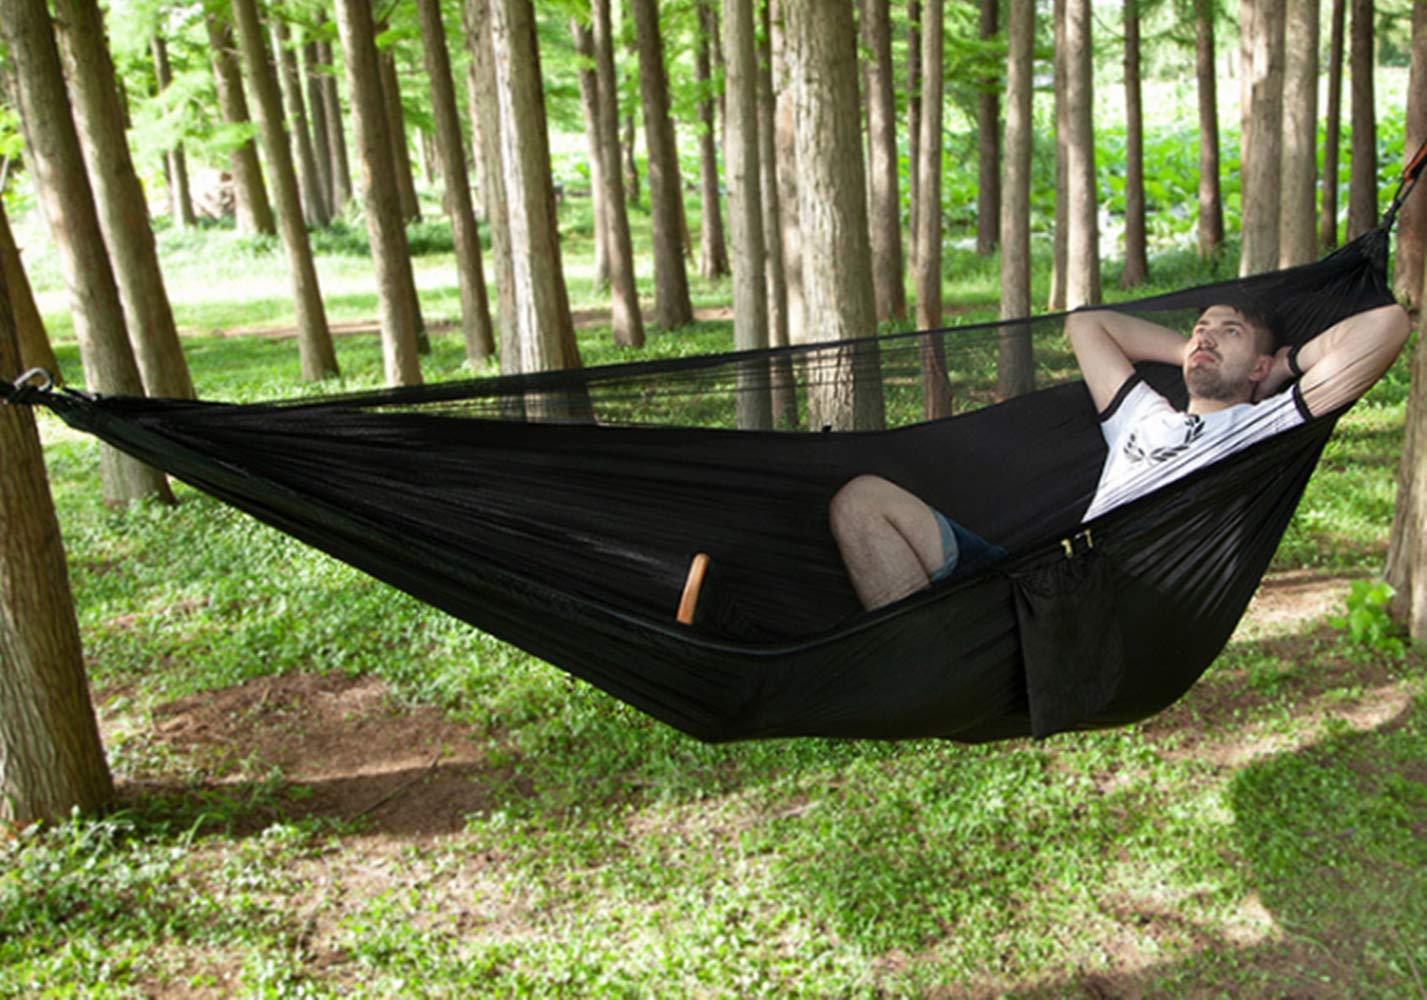 Camping Hammock with Mosquito Net - RRDF